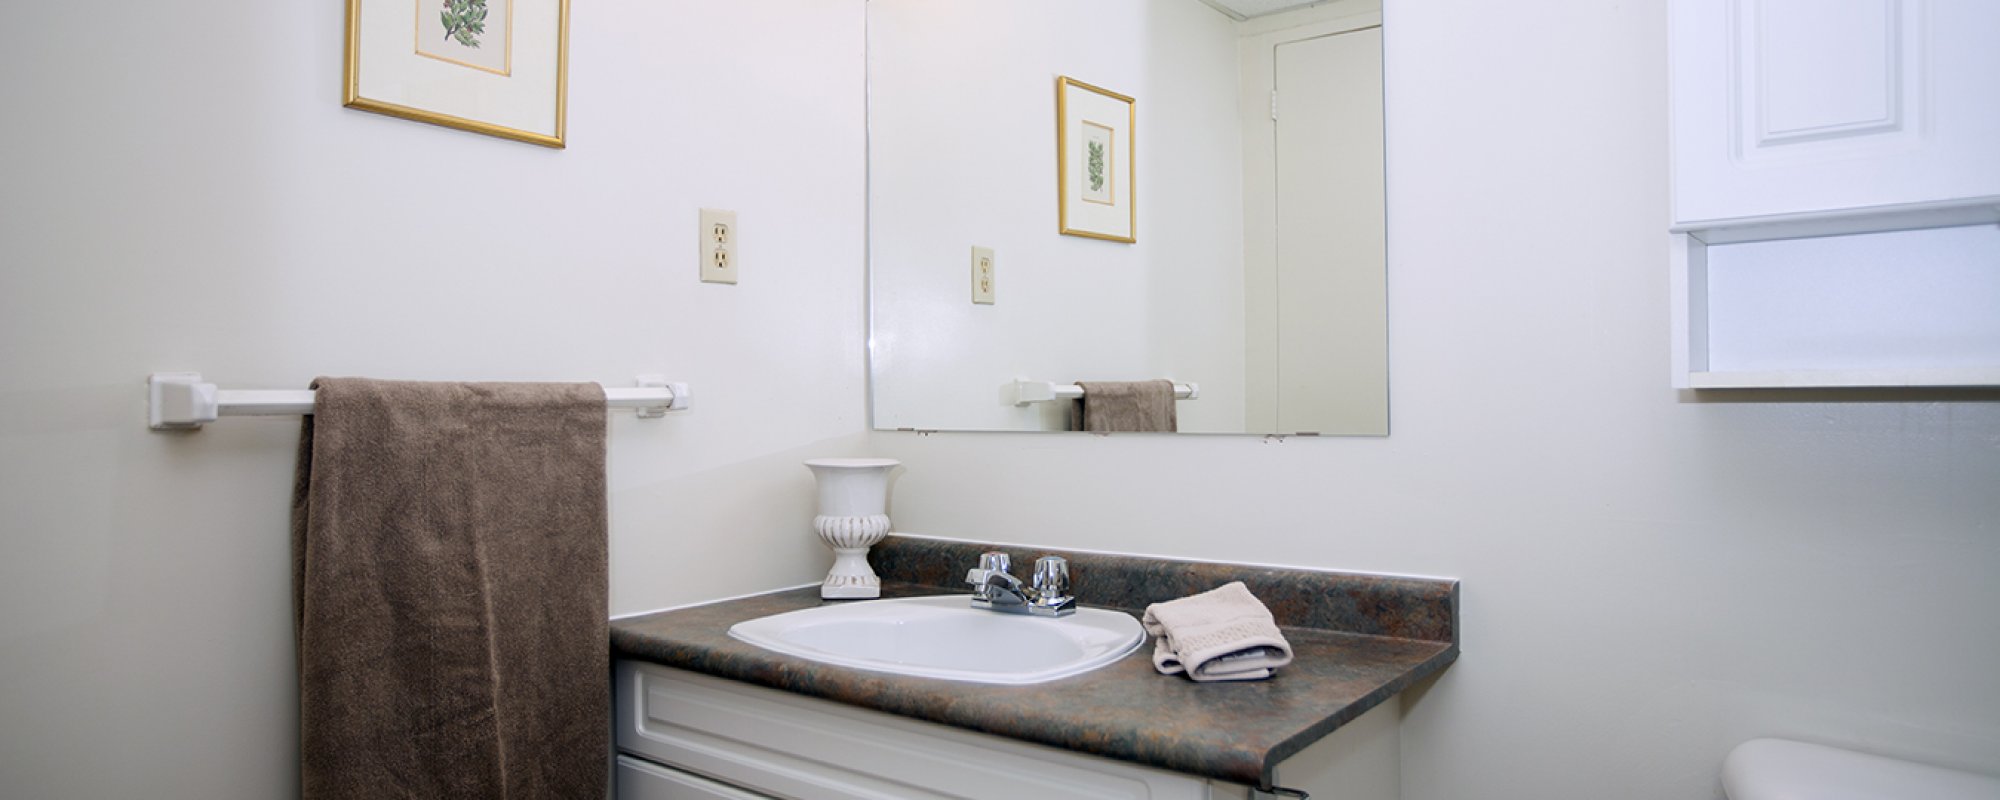 A bathroom in an apartment in 565 Proudfoot Place